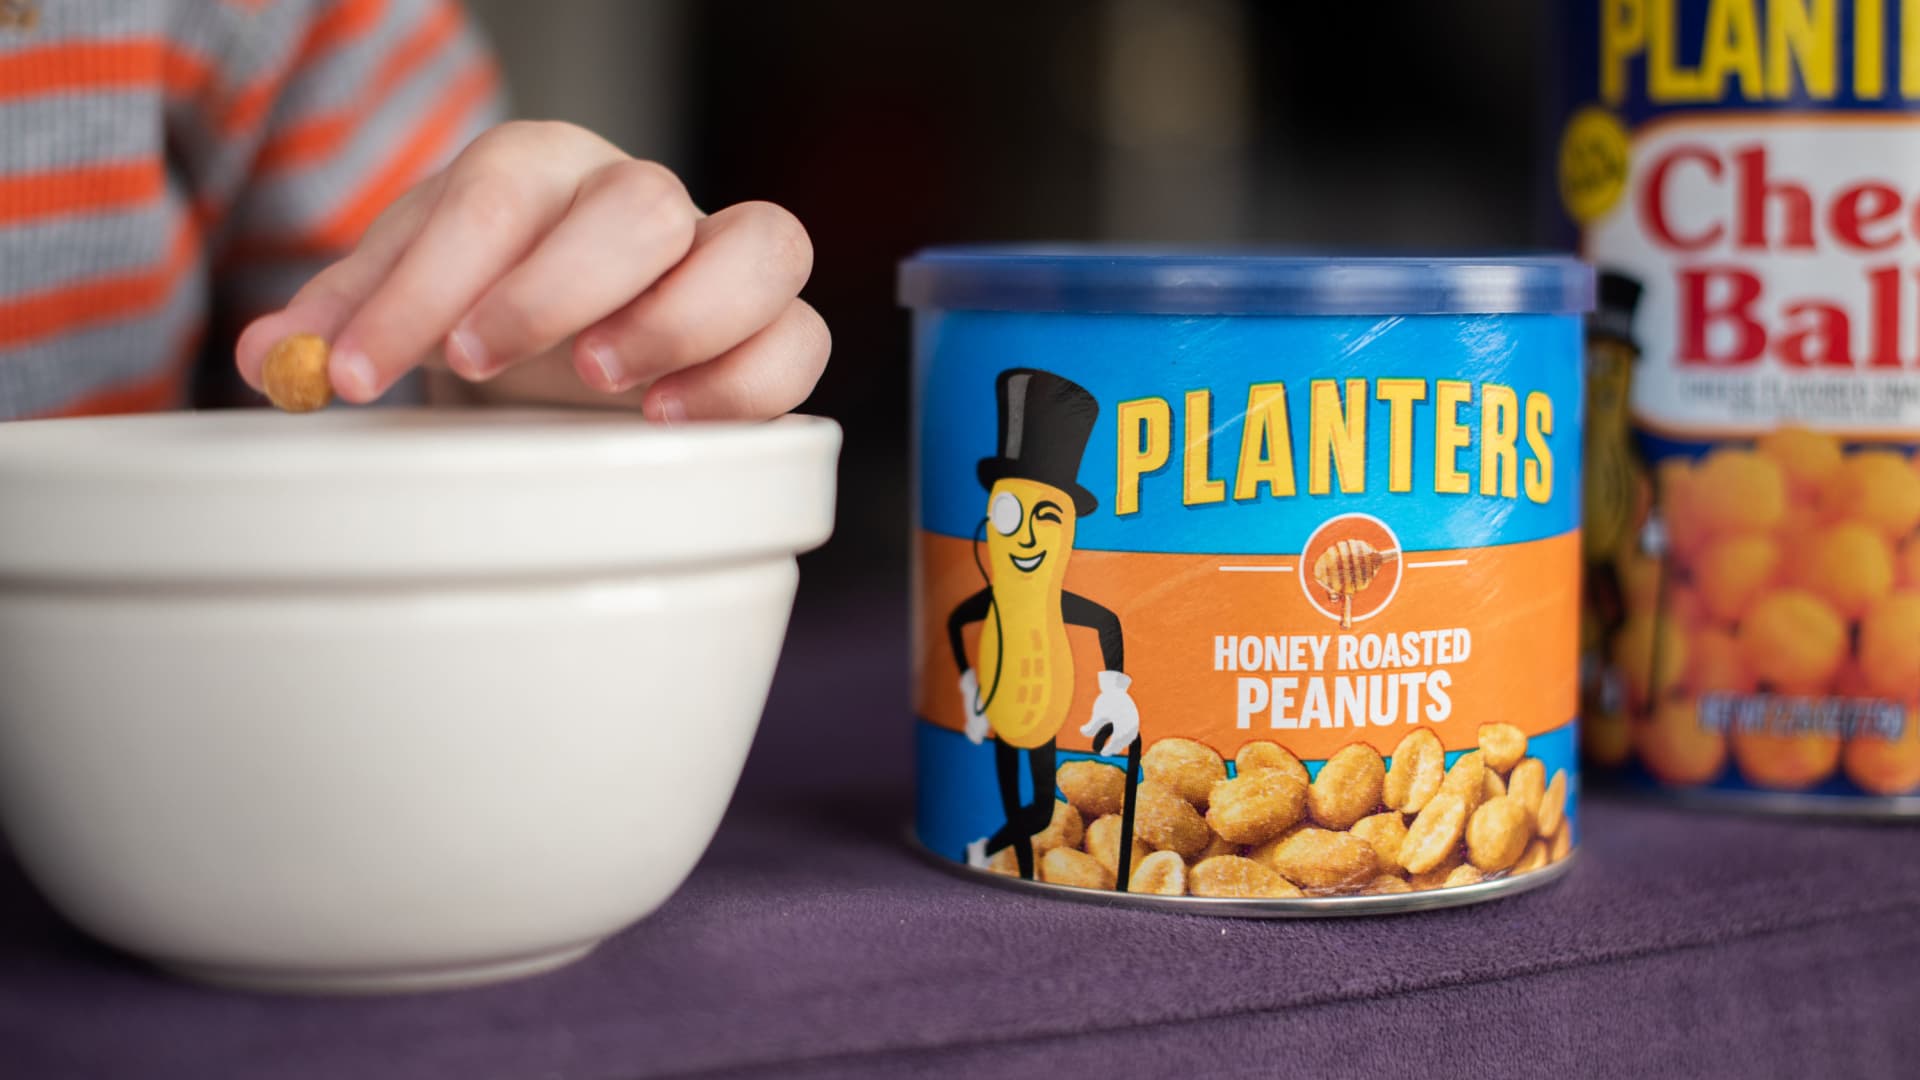 Alert for Snack Lovers: Why Your Favorite Planters Nuts Might Be Dangerous Now